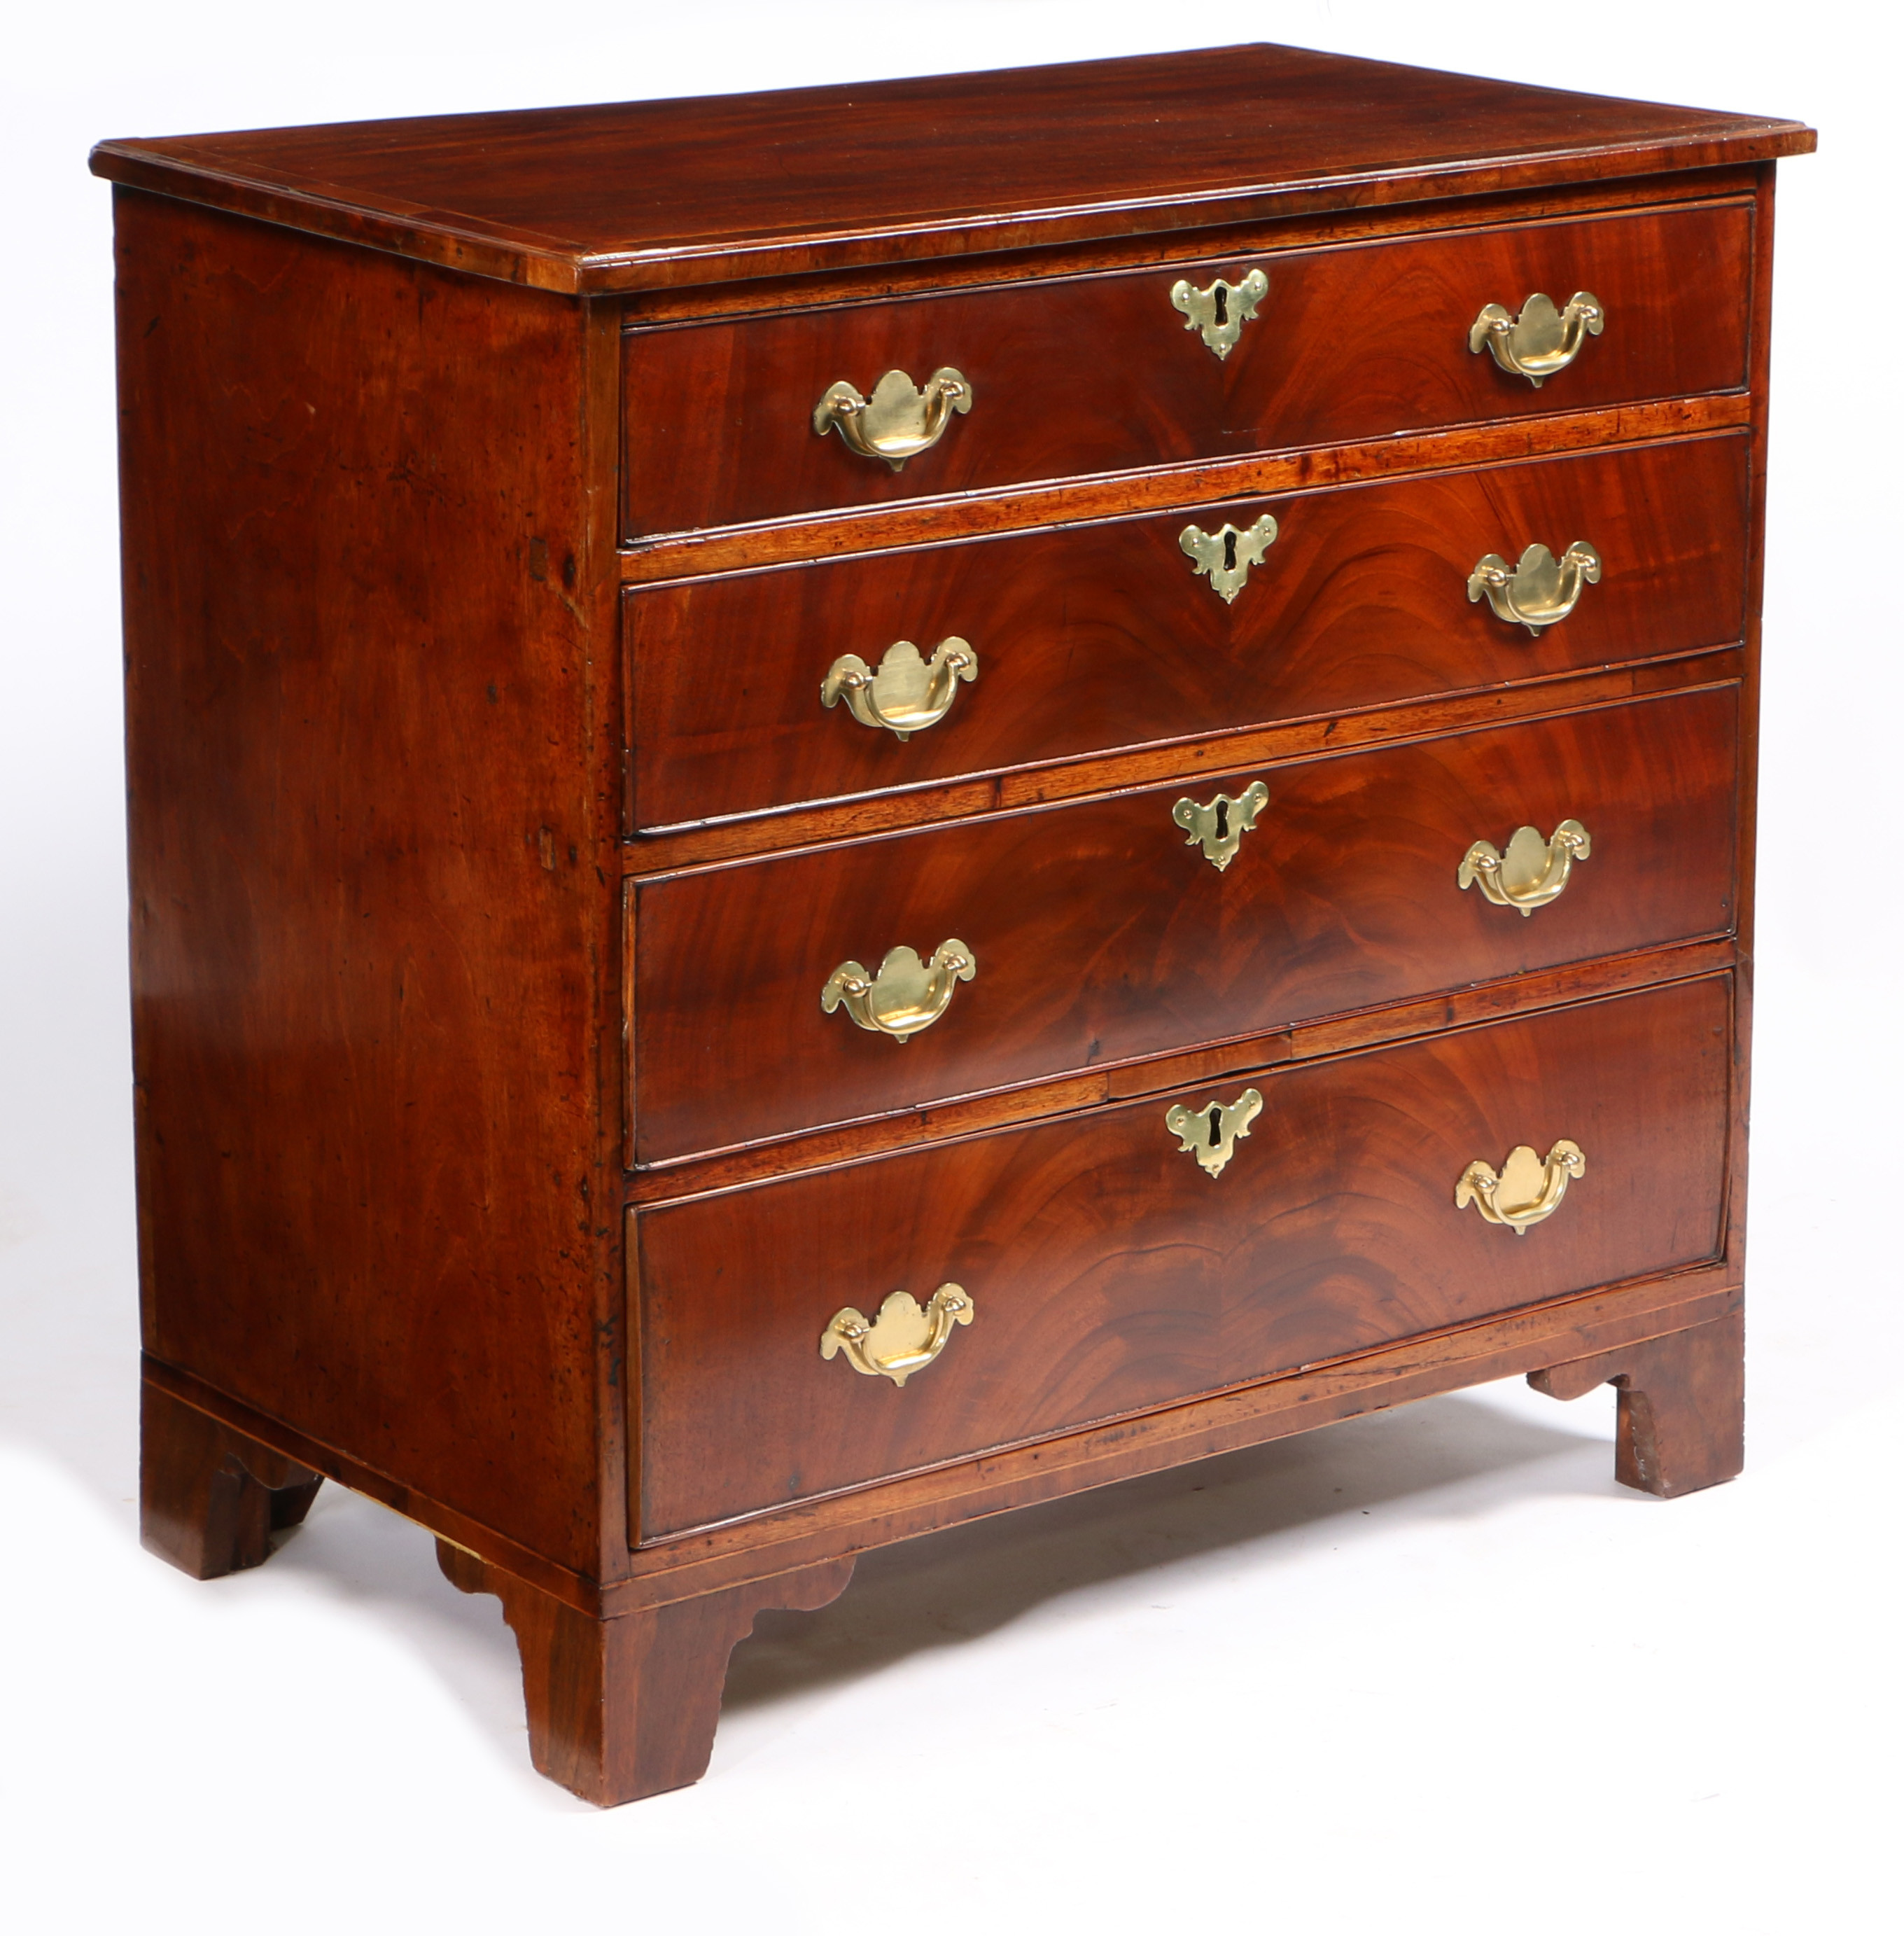 A GEORGE III MAHOGANY CHEST OF DRAWERS.